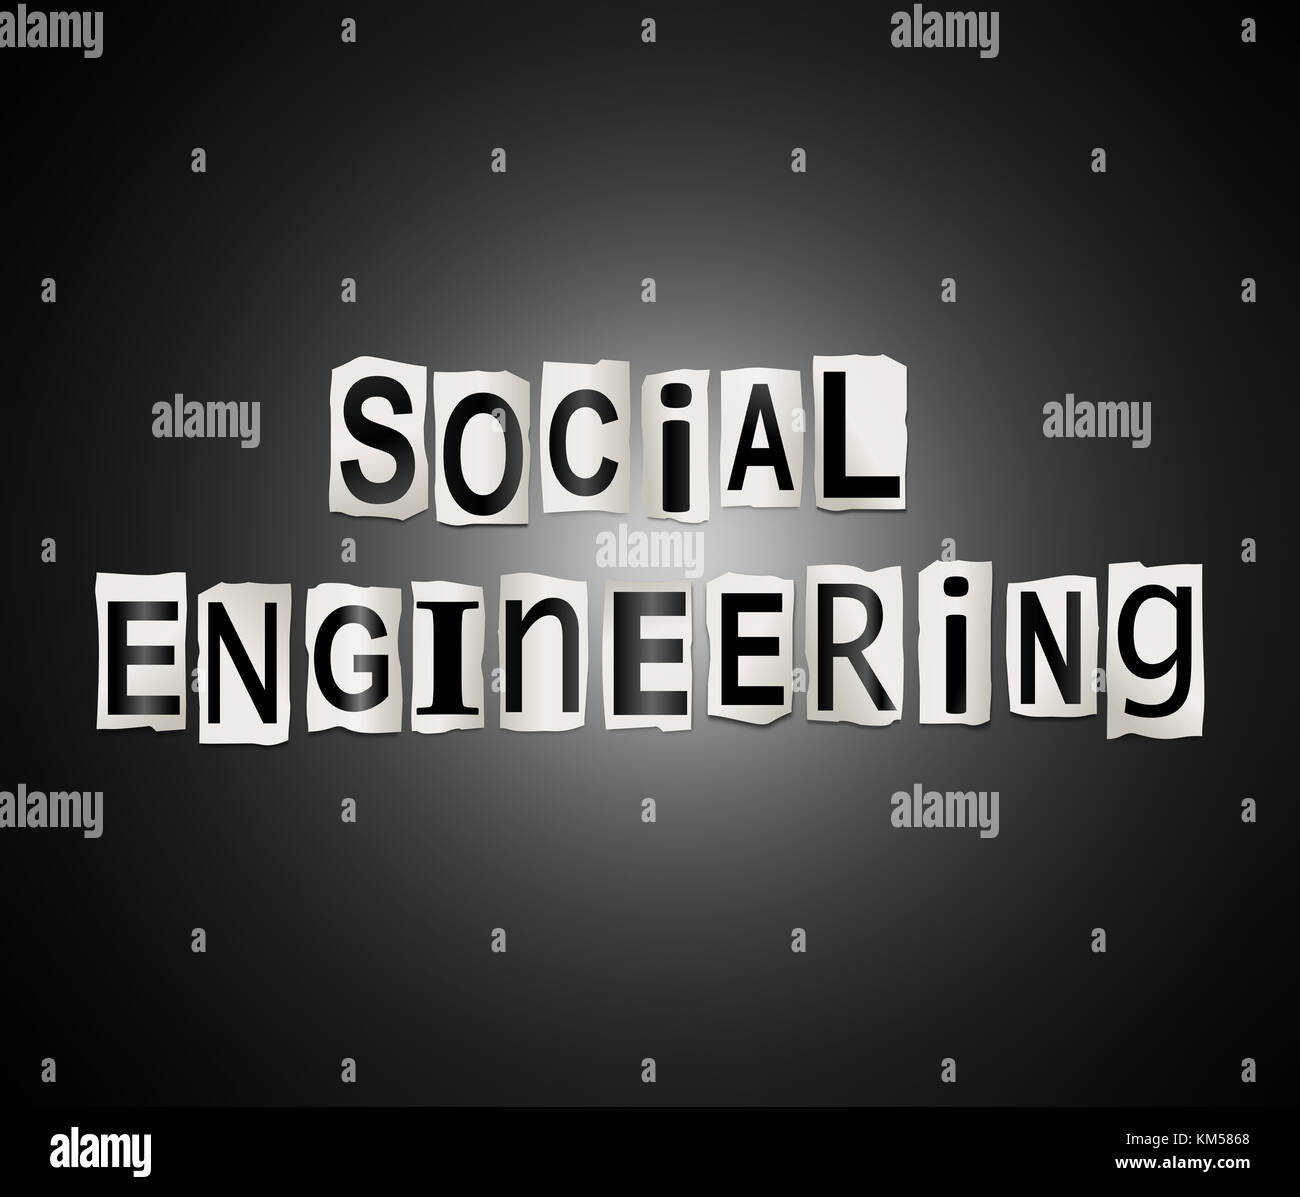 Illustration depicting a set of cut out printed letters arranged to form the words social engineering. Stock Photo